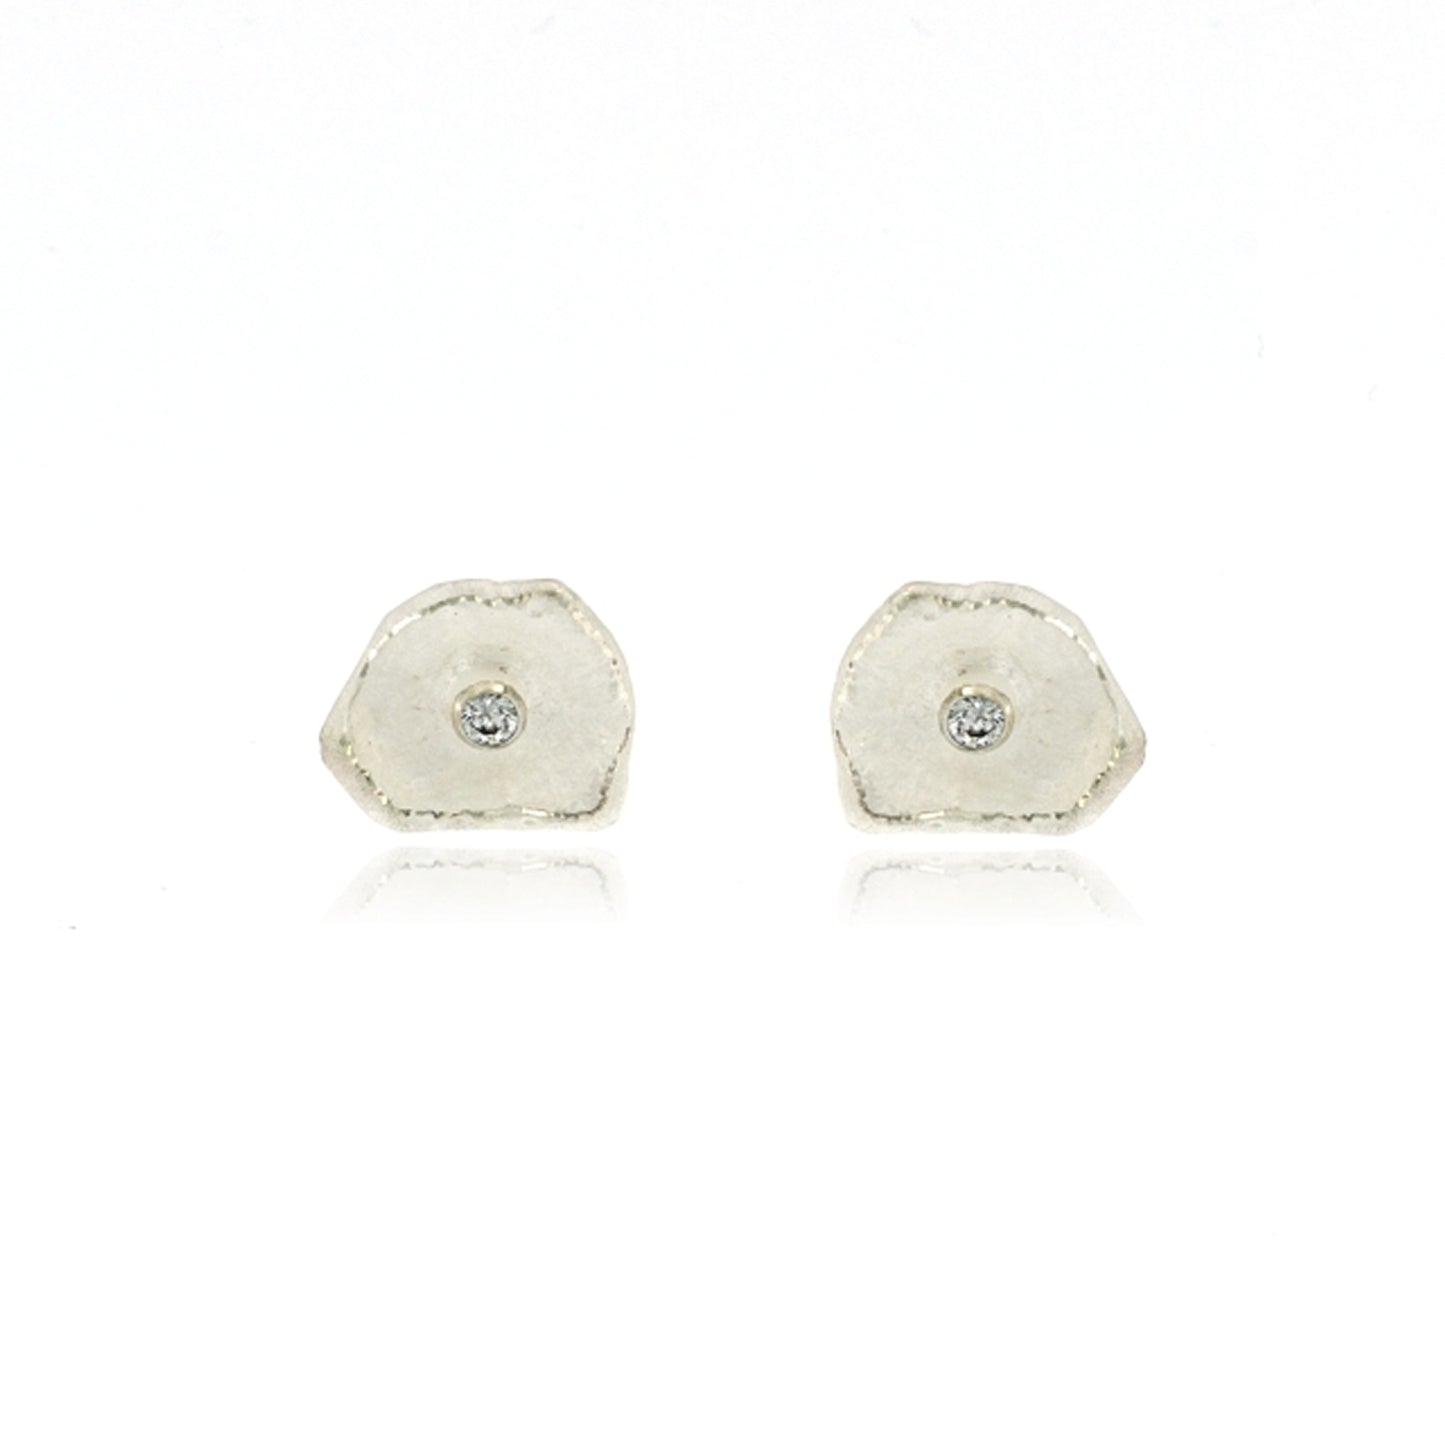 Mysterium Collection Sterling Petal & CZ Earrings (Sm)